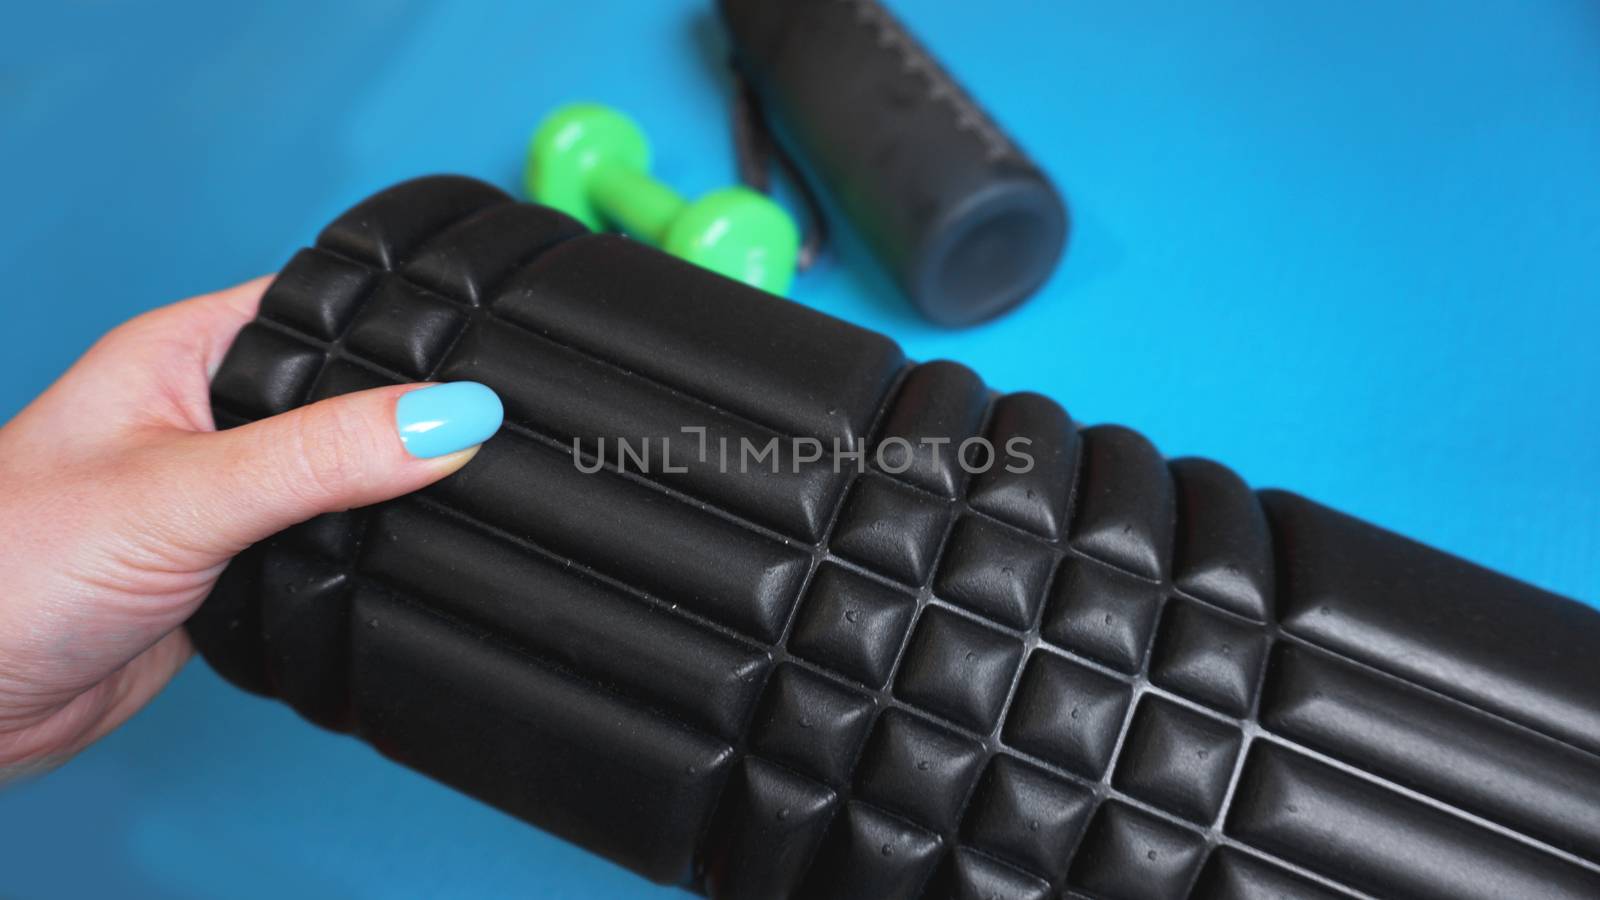 Foam Roller Gym Fitness Equipment Blue background self Myofascial Release by natali_brill